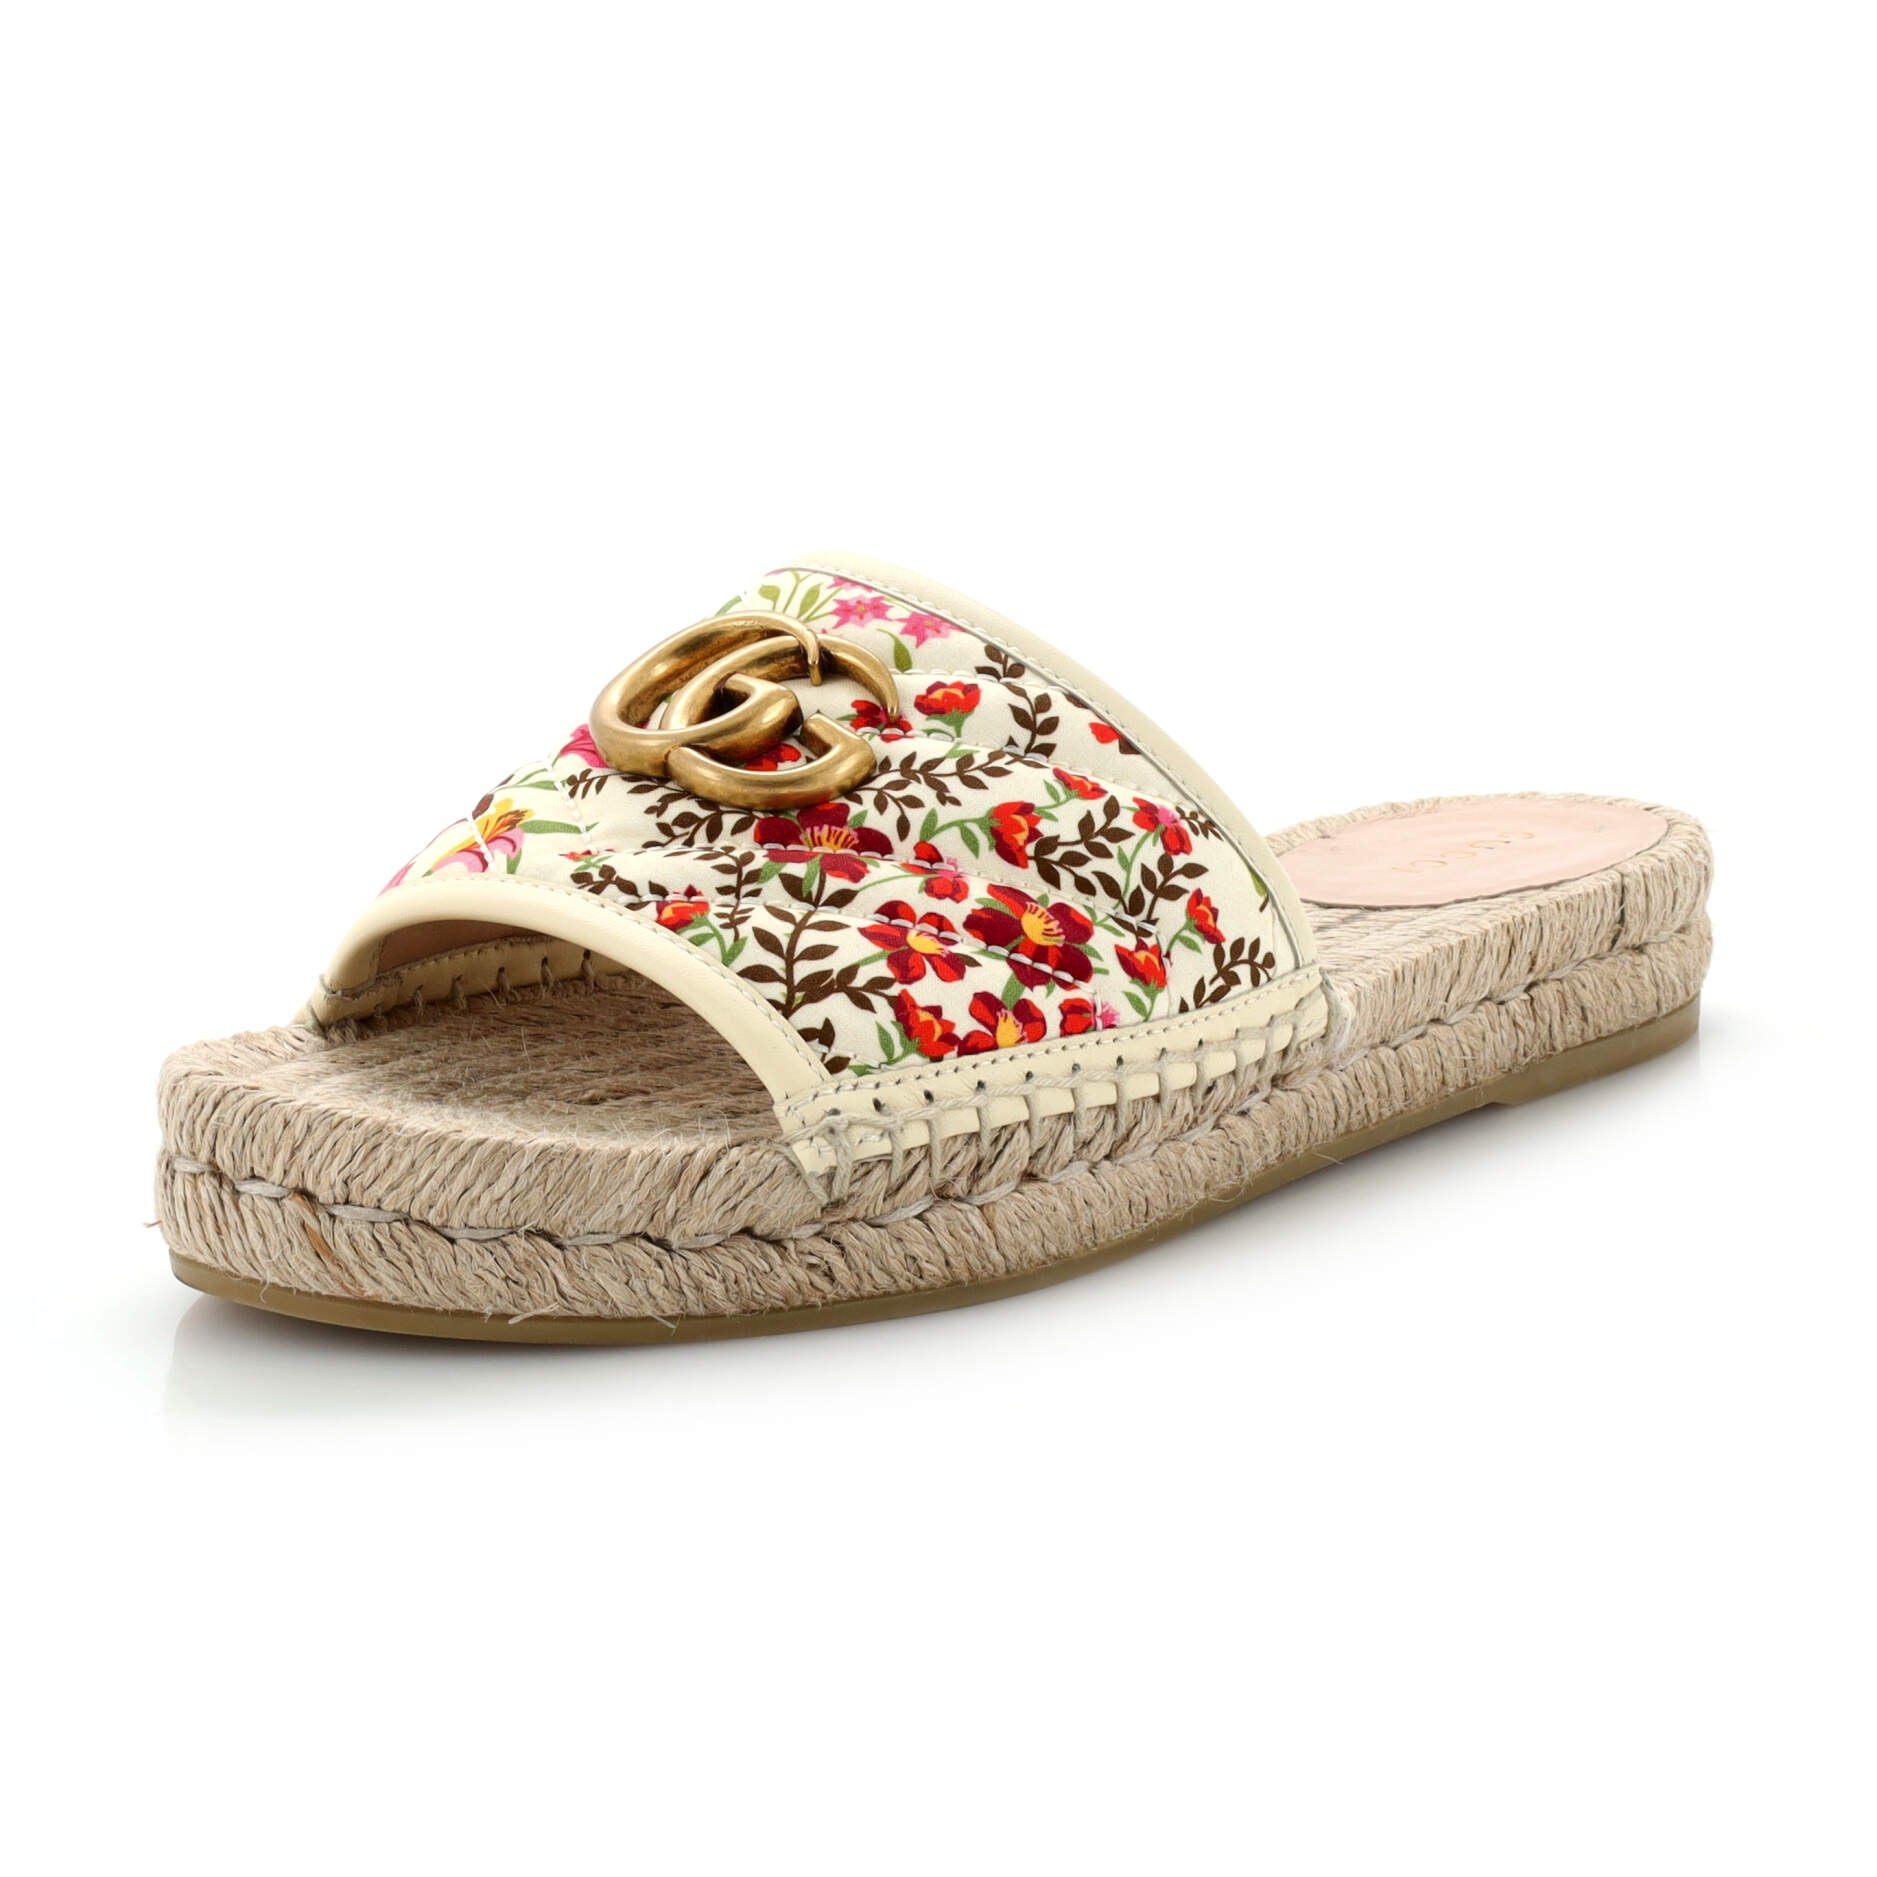 Women's GG Marmont Espadrilles Slide Sandals Quilted Printed Canvas